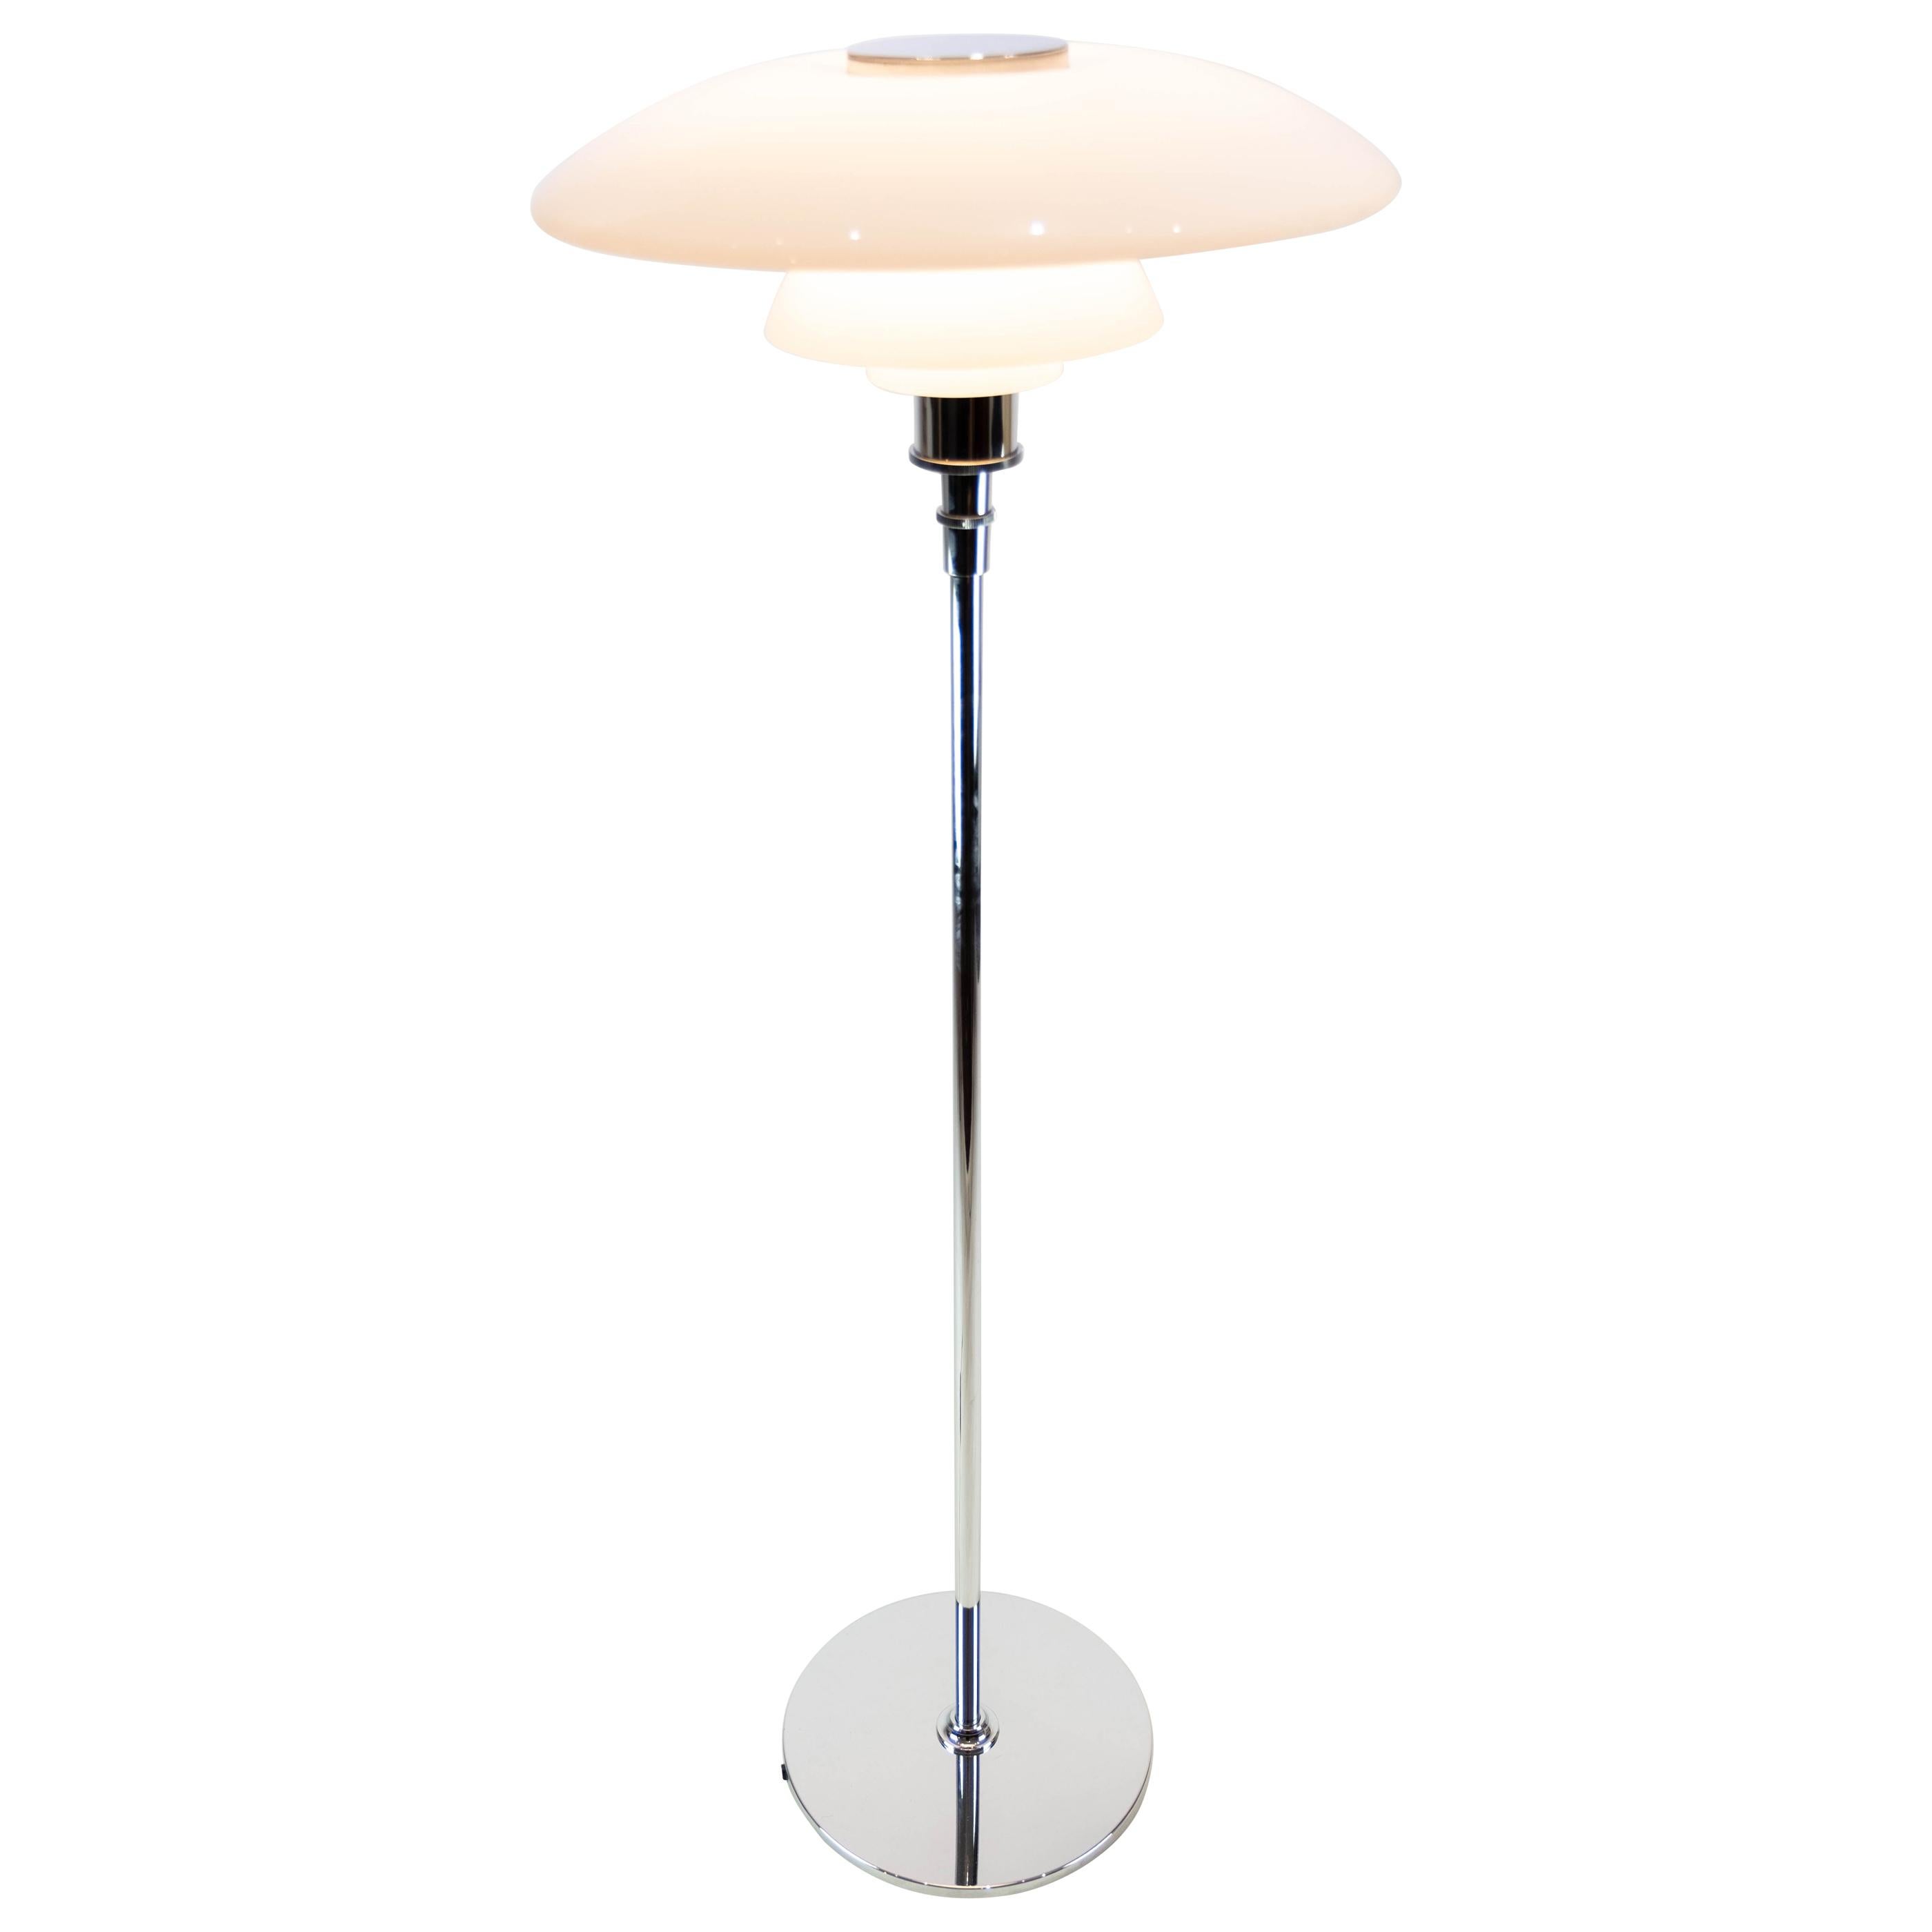 Ph 4 1/2-3 1/2 Floor Lamp of Chrome with Shades of Opaline Glass